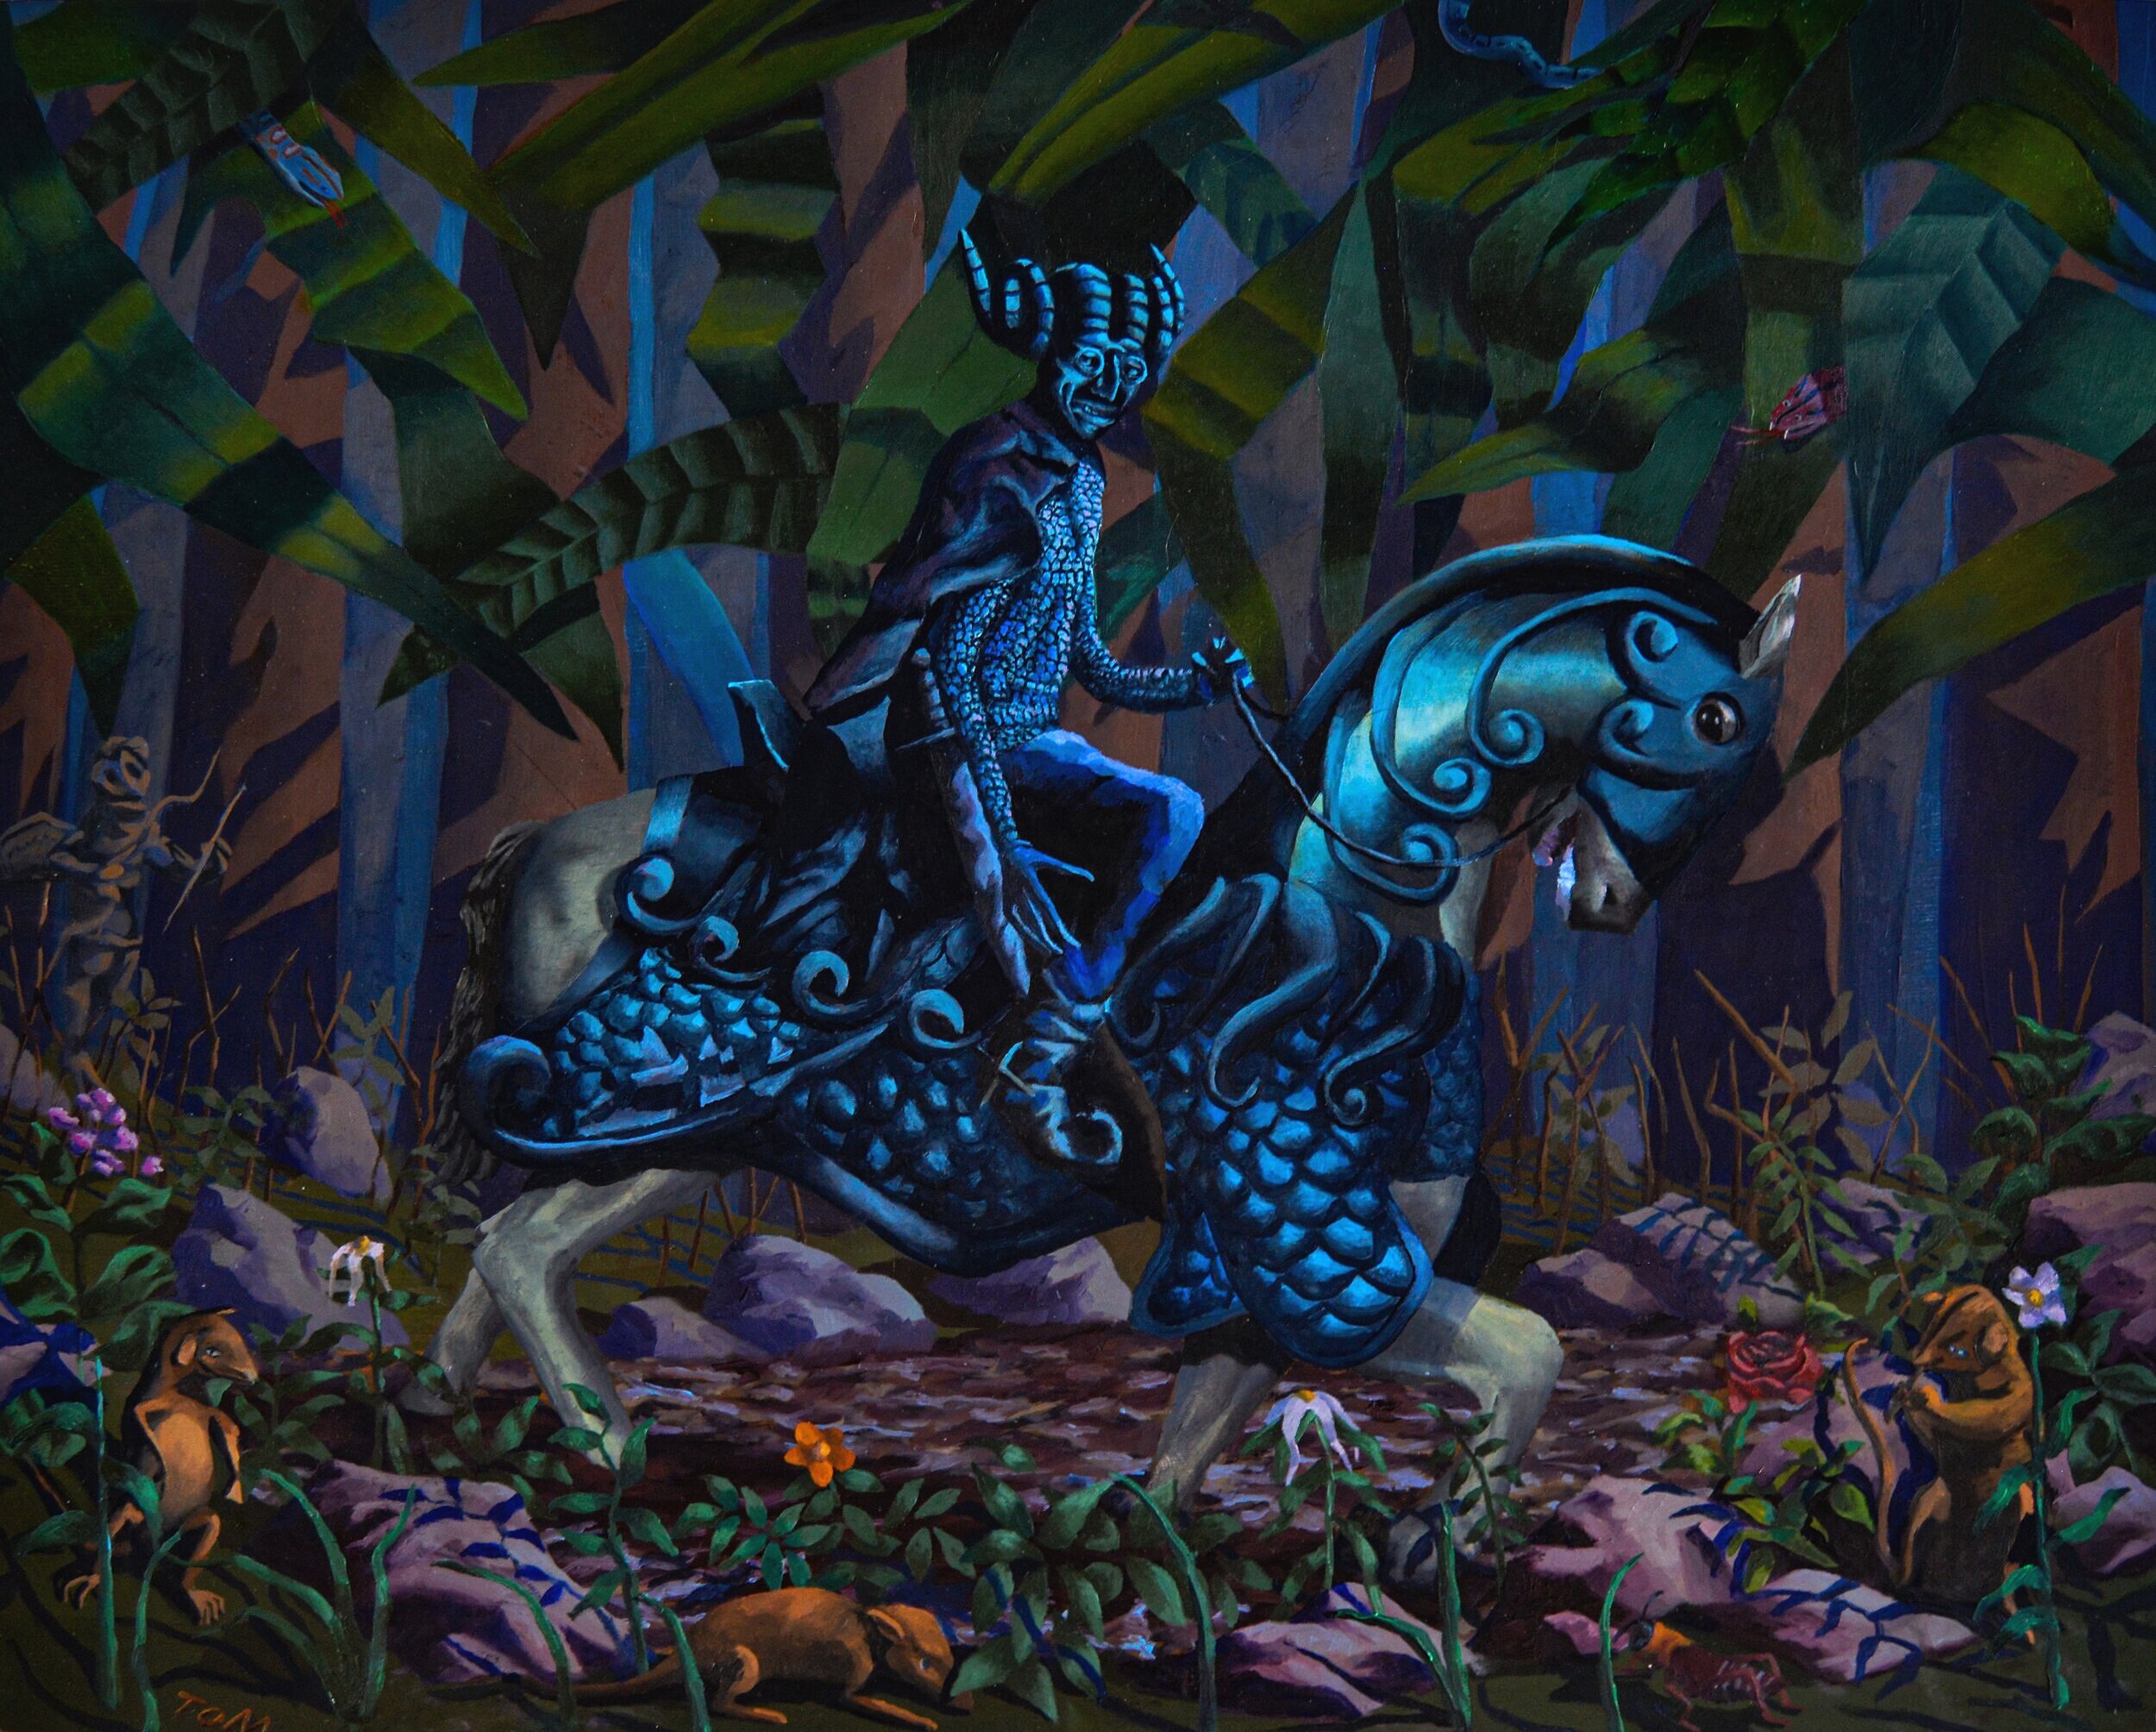 "Masked Rider in the Forest with Creatures"